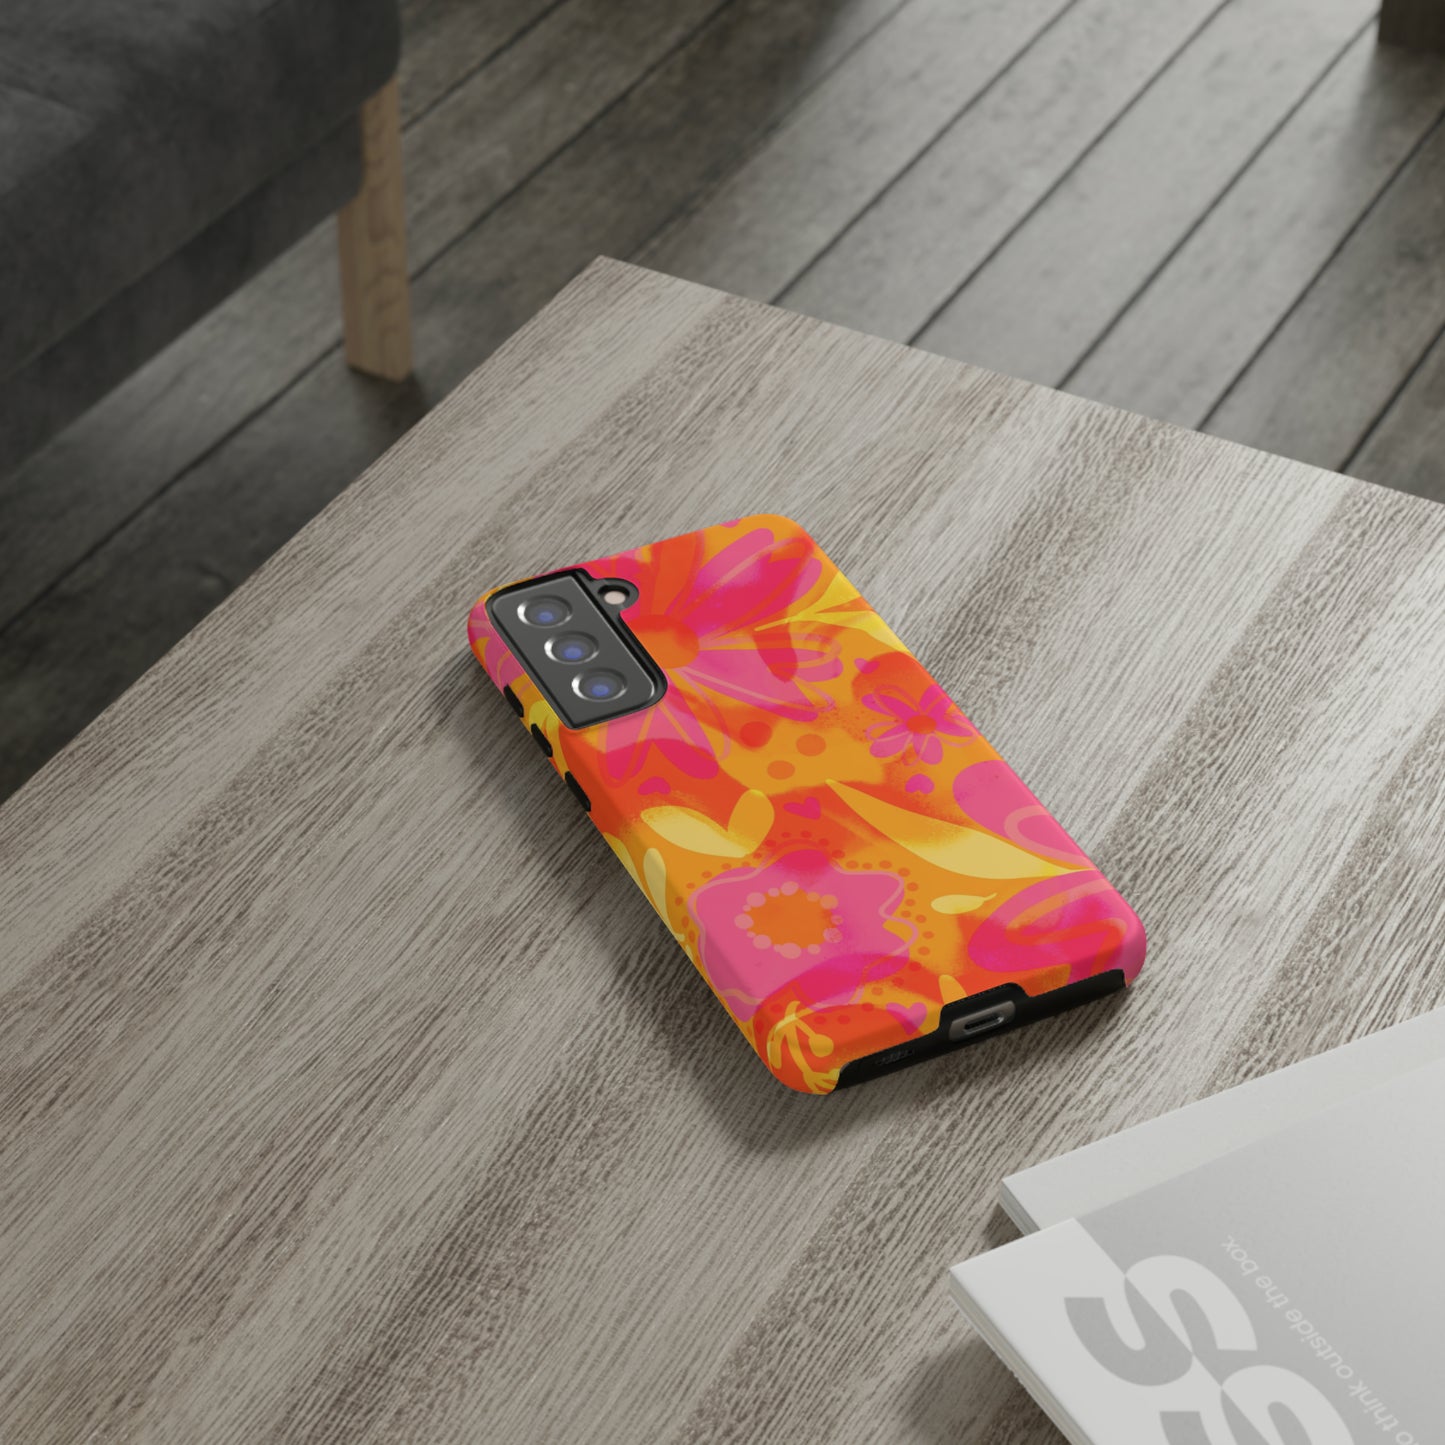 Color Vibe Only / Samsung Case